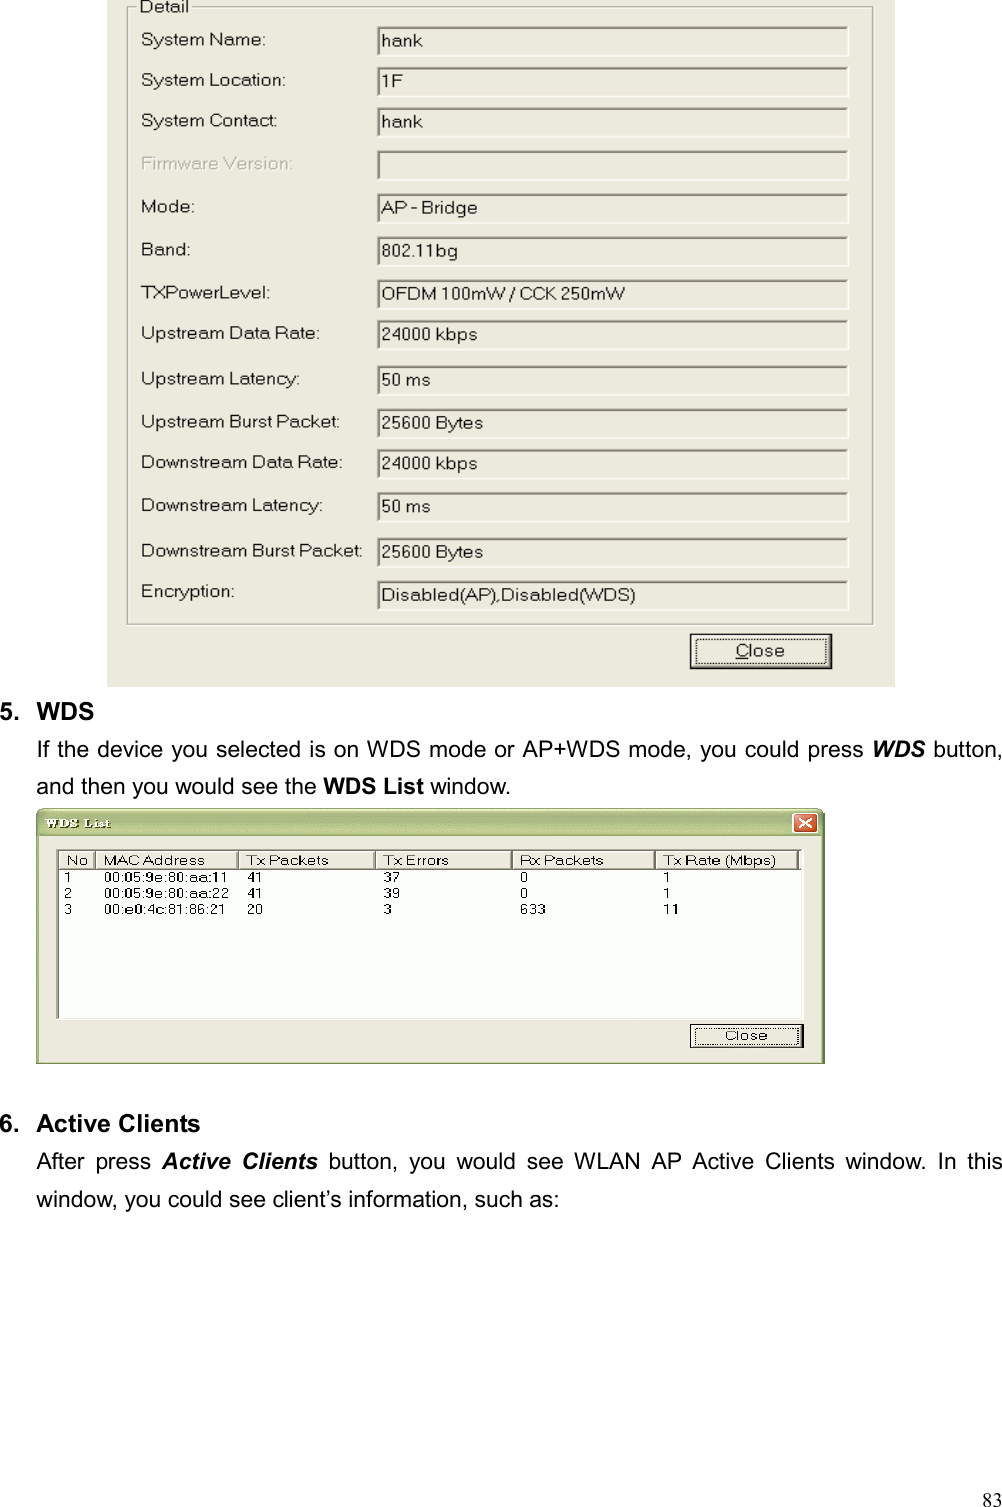  83 5. WDS If the device you selected is on WDS mode or AP+WDS mode, you could press WDS button, and then you would see the WDS List window.   6. Active Clients After press Active Clients button, you would see WLAN AP Active Clients window. In this window, you could see client’s information, such as: 